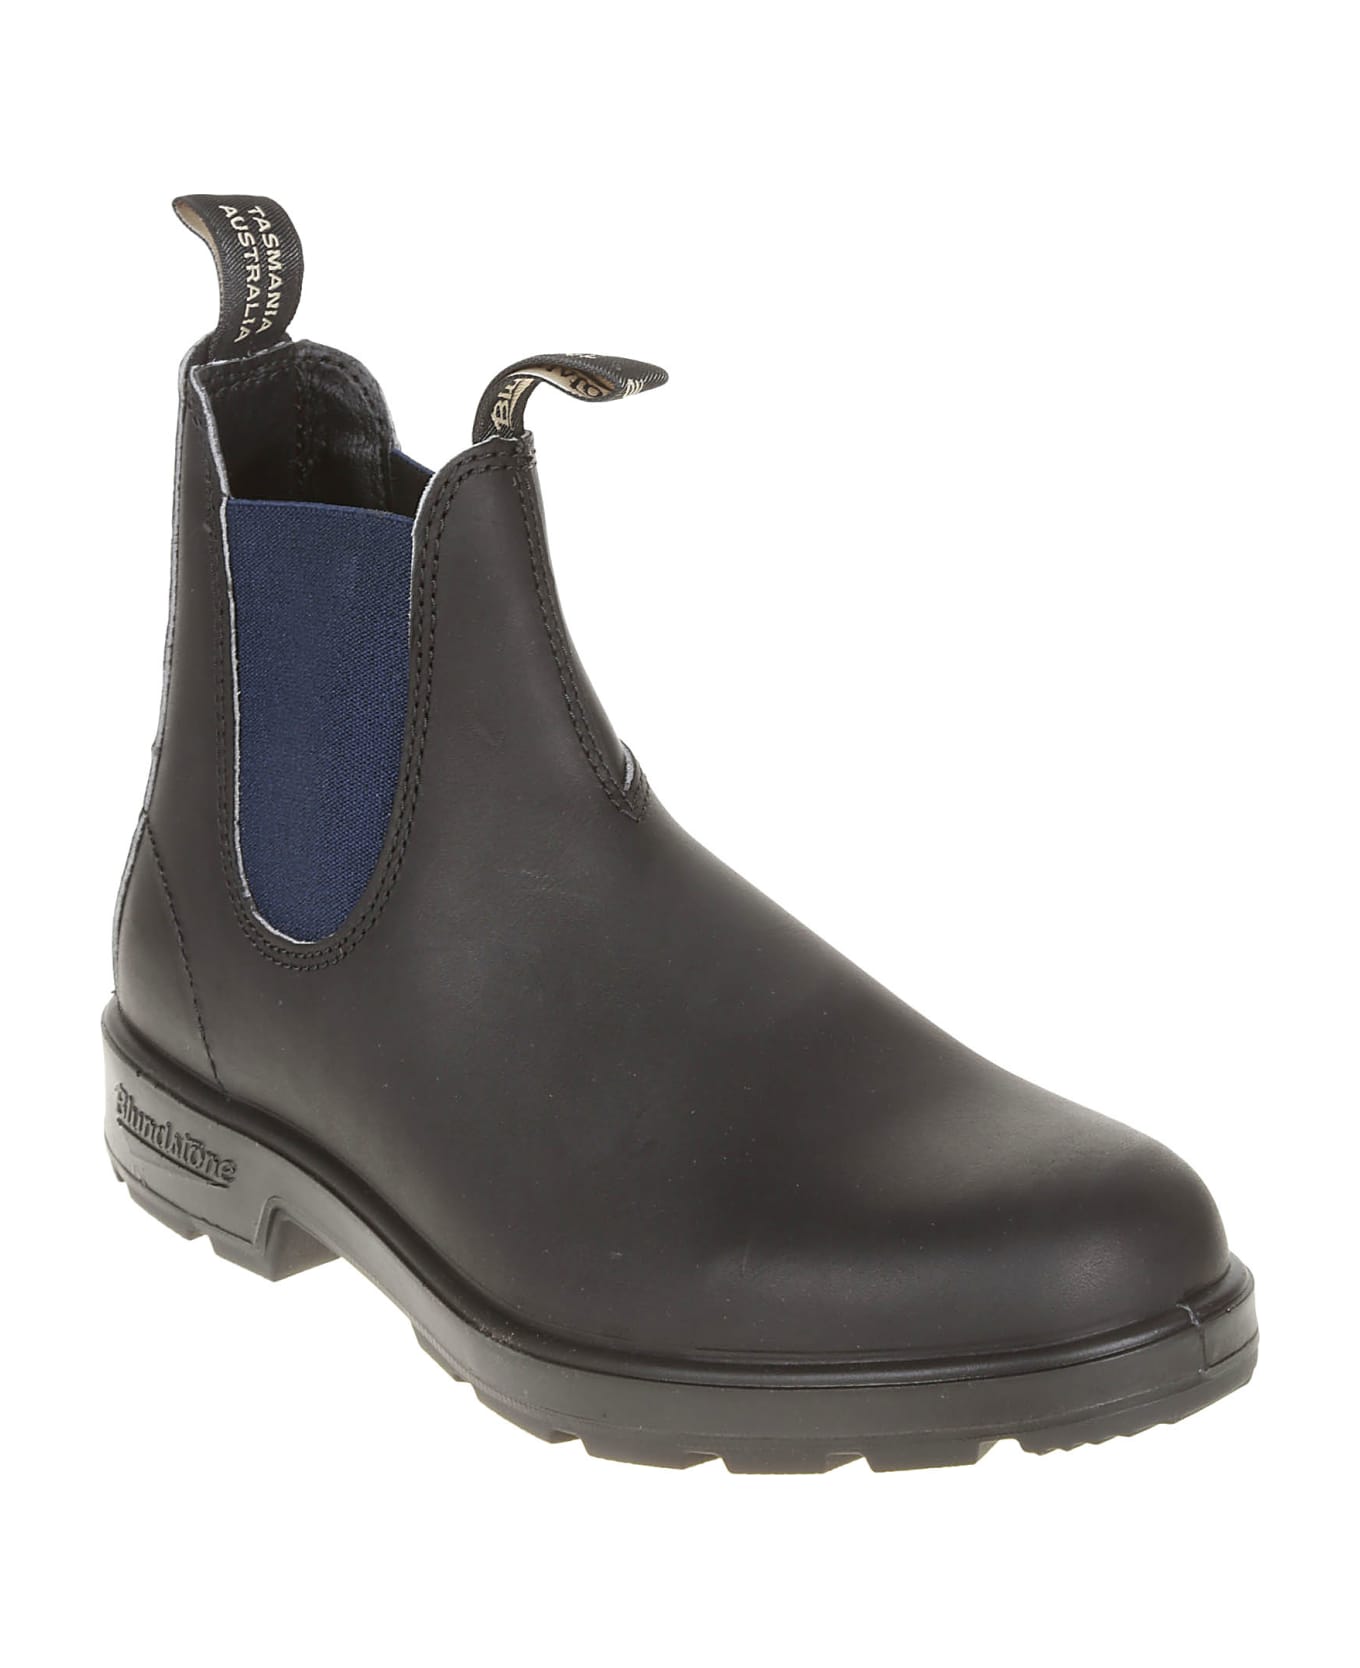 Blundstone Colored Elastic Sided Boots - Black/Navy